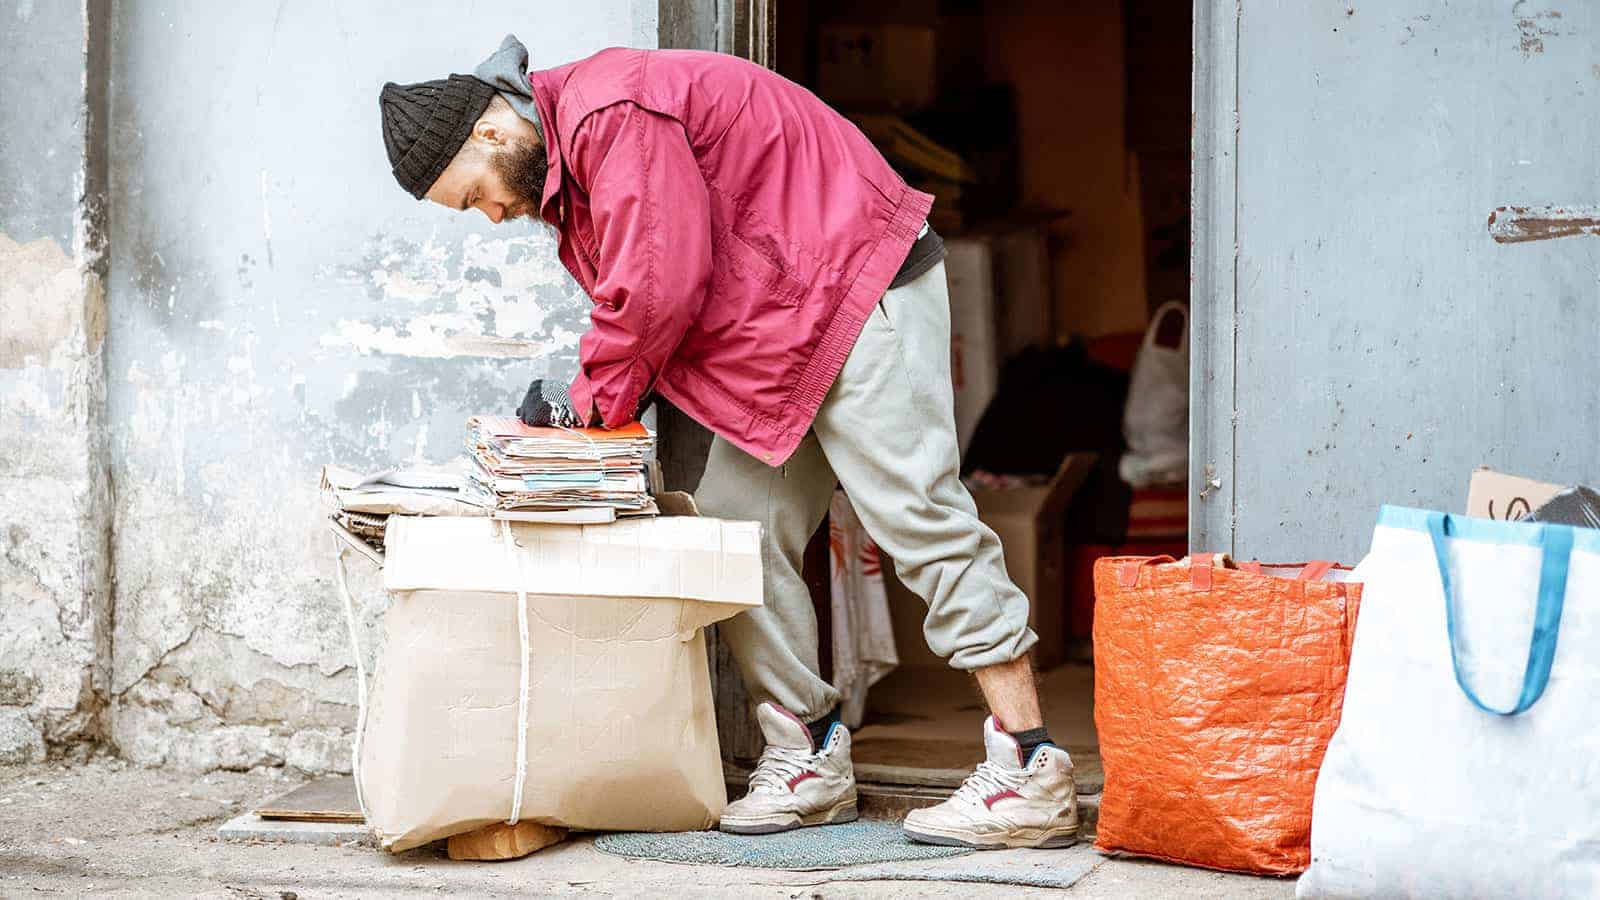 Arkansas City Is Actually Paying the Homeless to Pick Up Trash